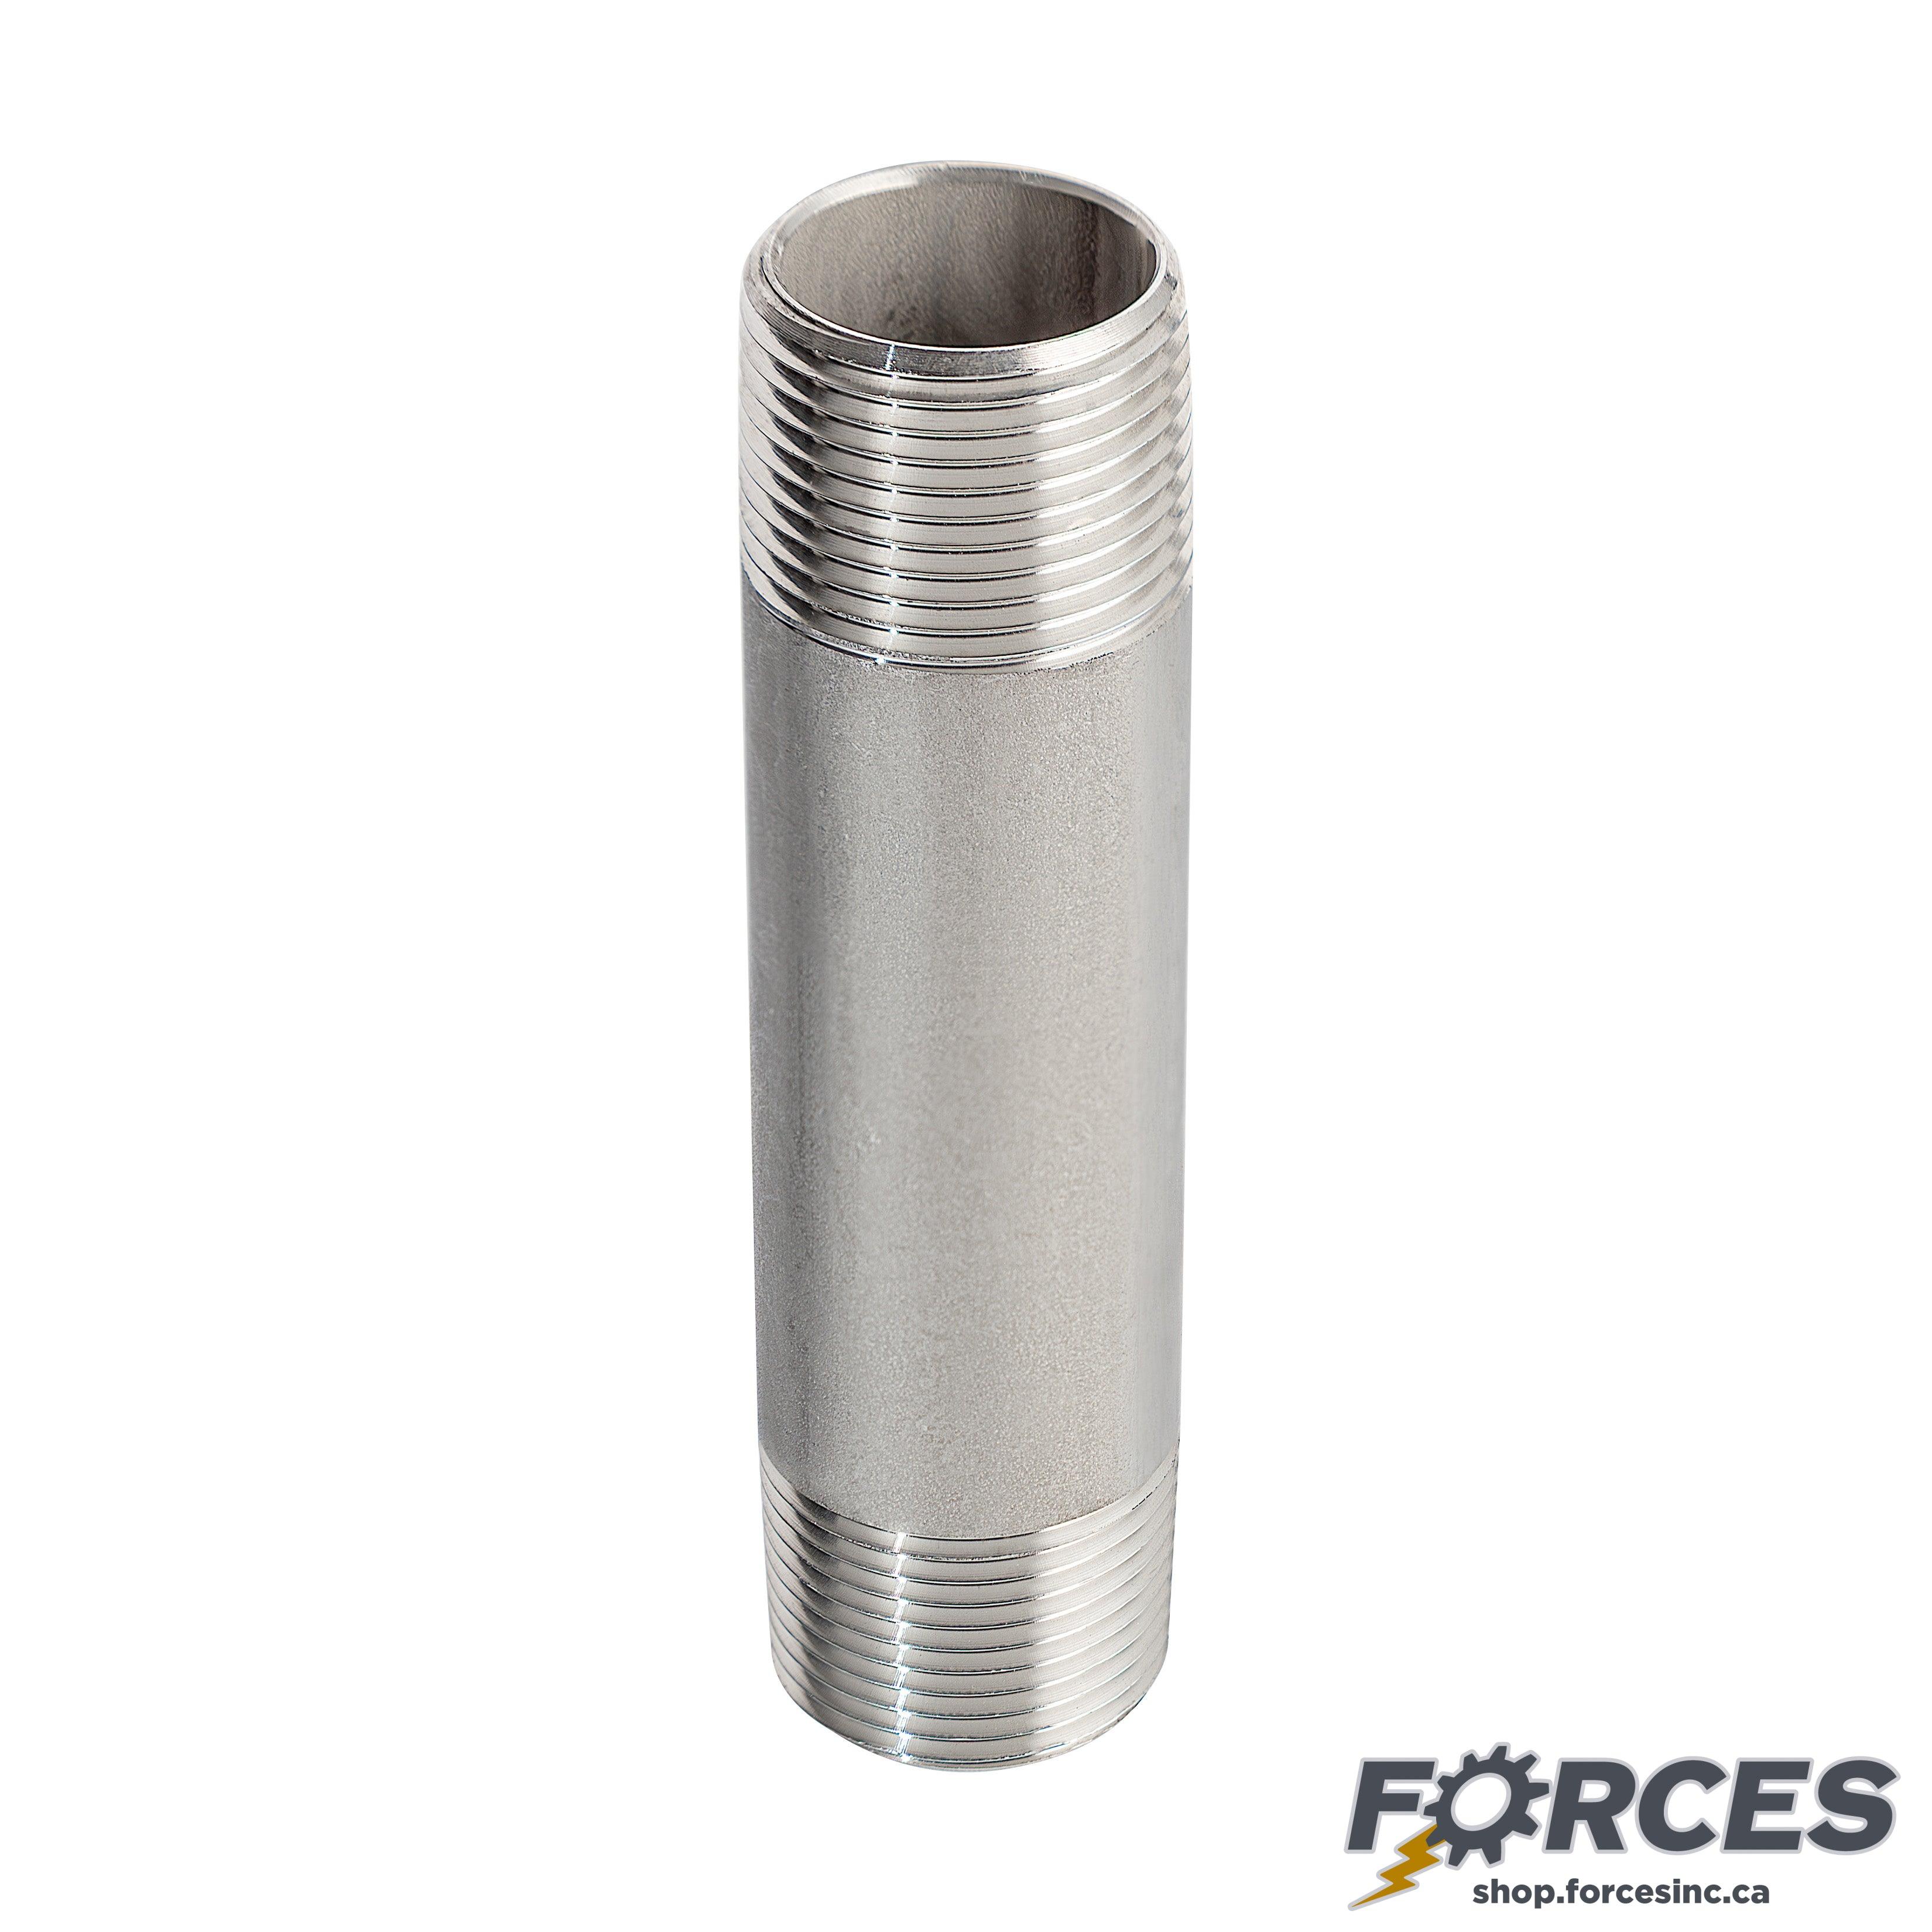 1-1/2" X 12" Long Nipple - Stainless Steel 316 - Forces Inc